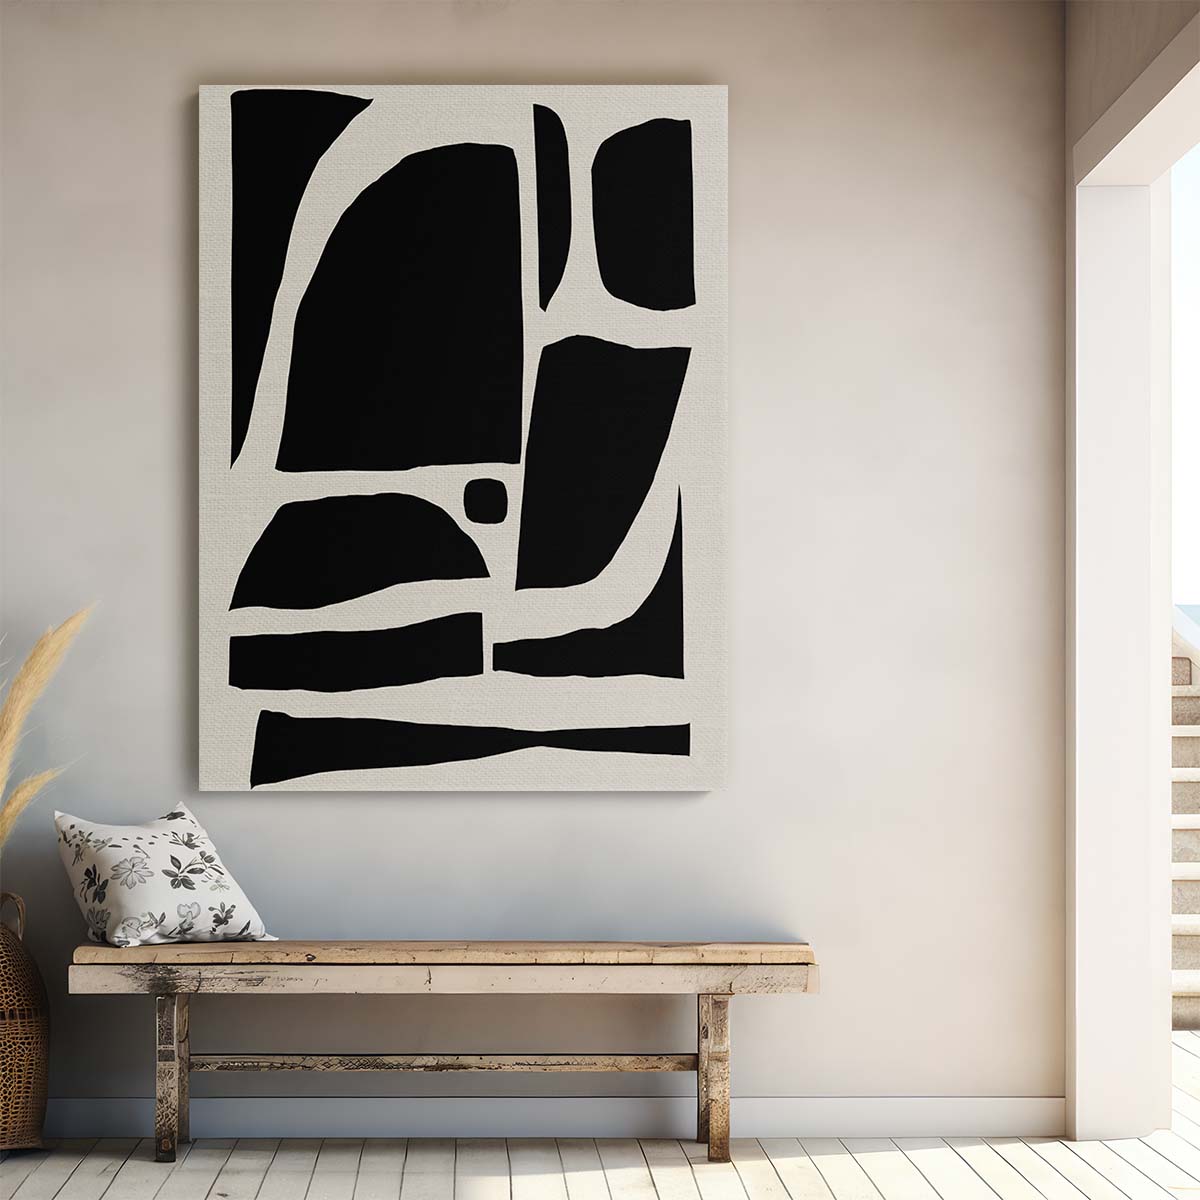 Dan Hobday Contemporary Abstract Geometric Illustration Wall Art by Luxuriance Designs, made in USA